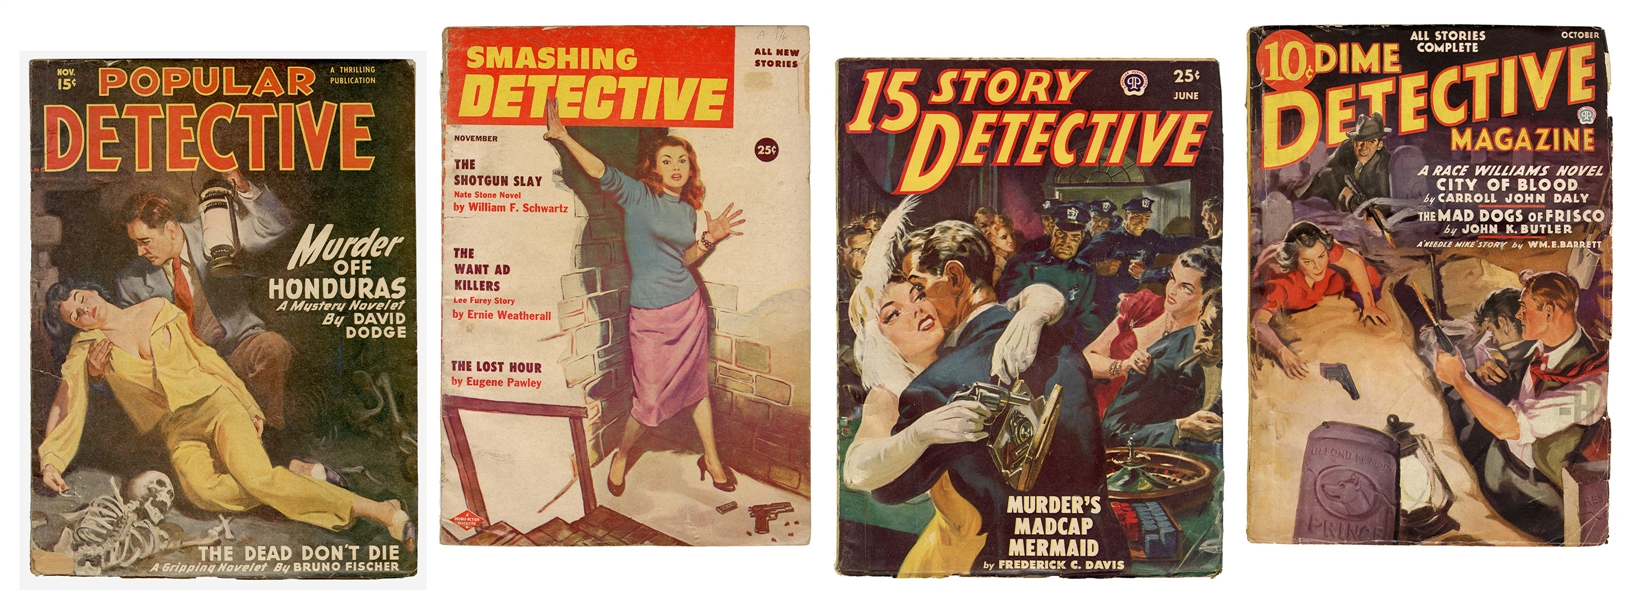  [DETECTIVE PULPS]. Various Detective Writers in Pulp Magazi...